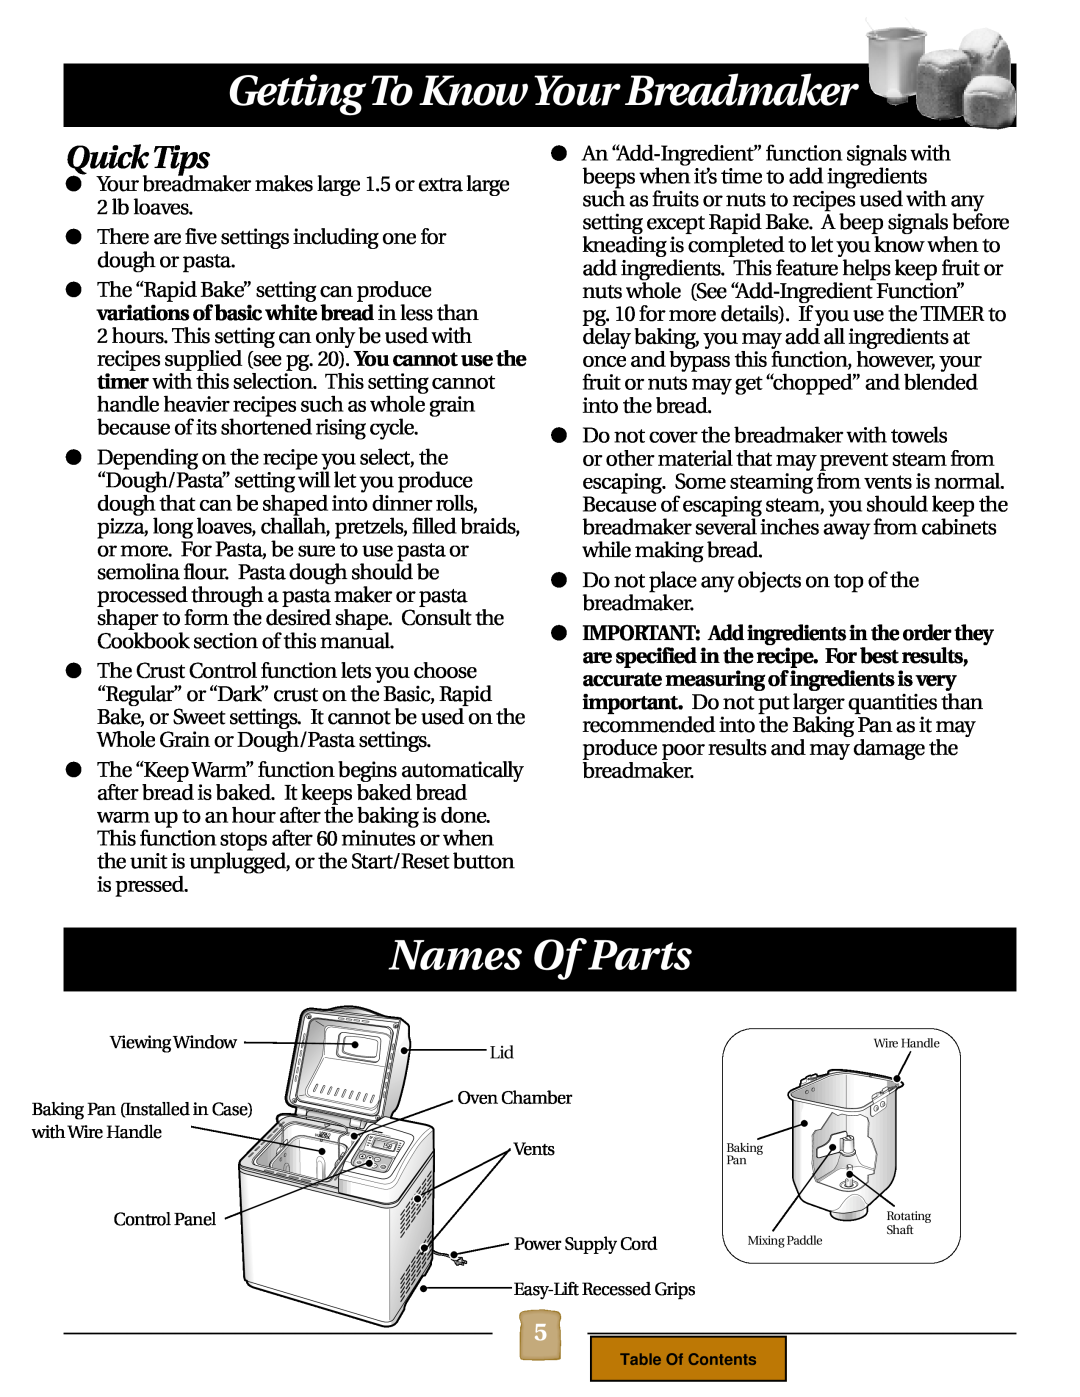 Black & Decker B1620 operating instructions Getting To KnowYour Breadmaker, Names Of Parts, Quick Tips 